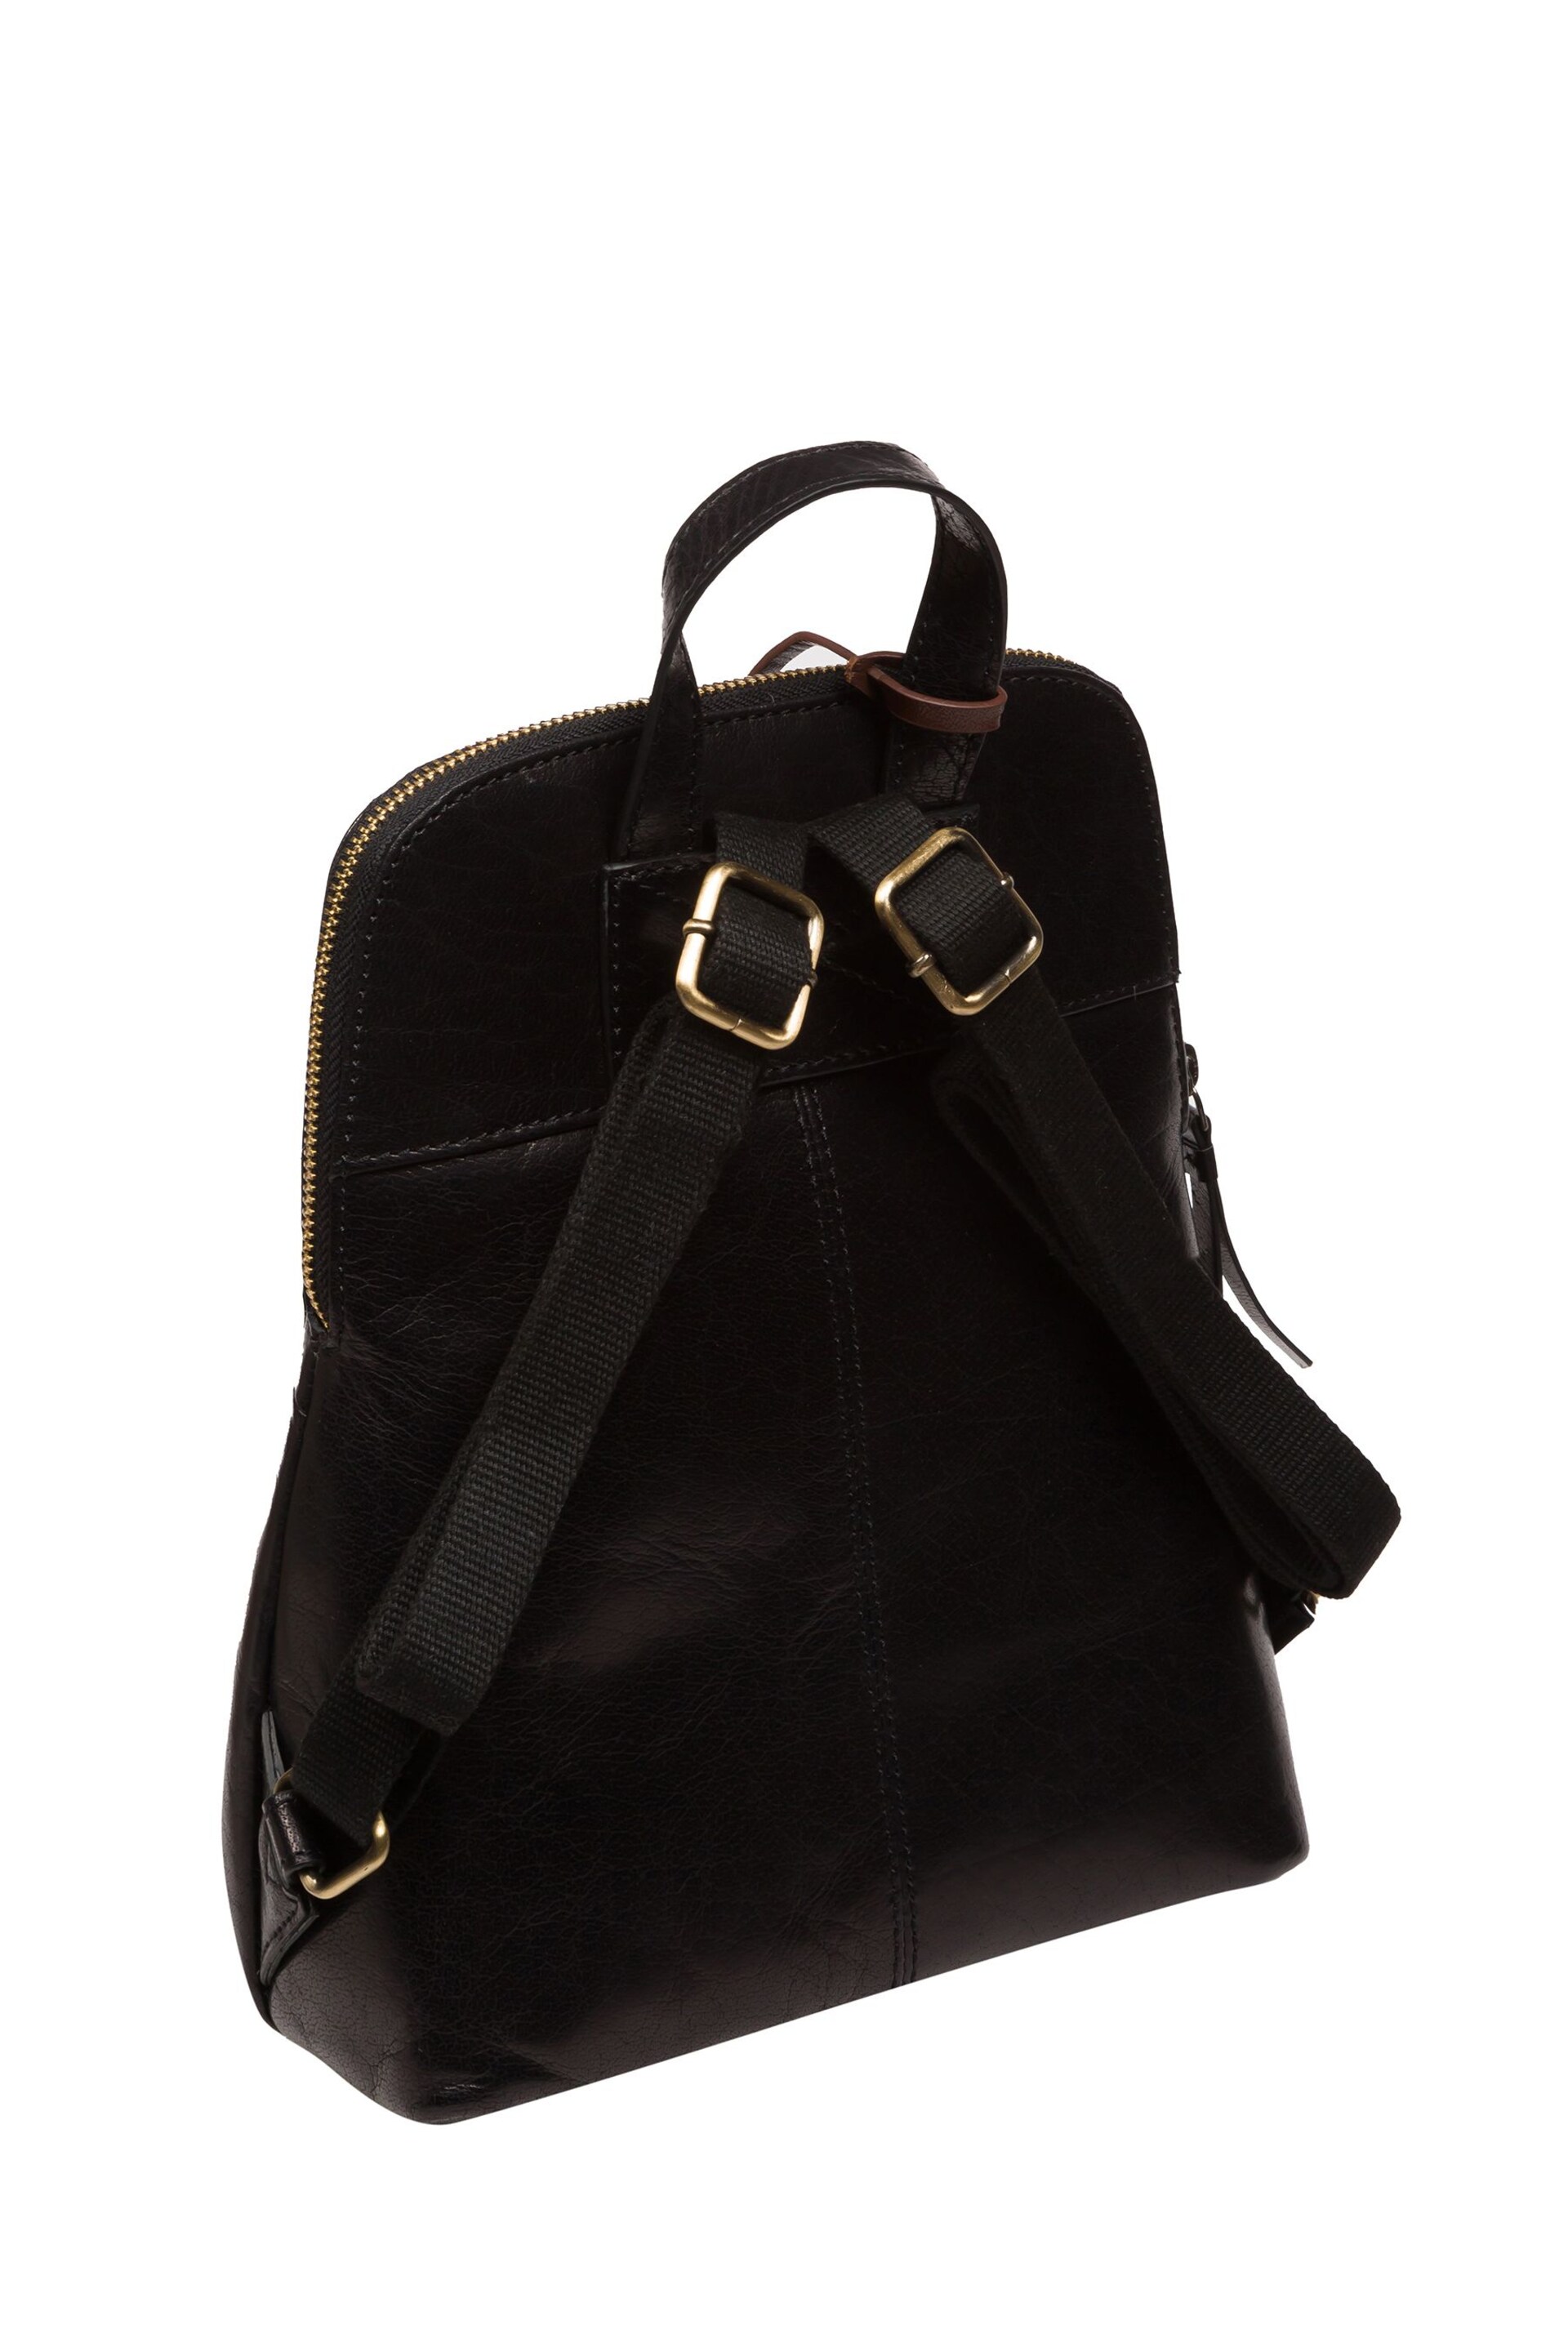 Conkca 'Kerrie' Leather Backpack - Image 3 of 6